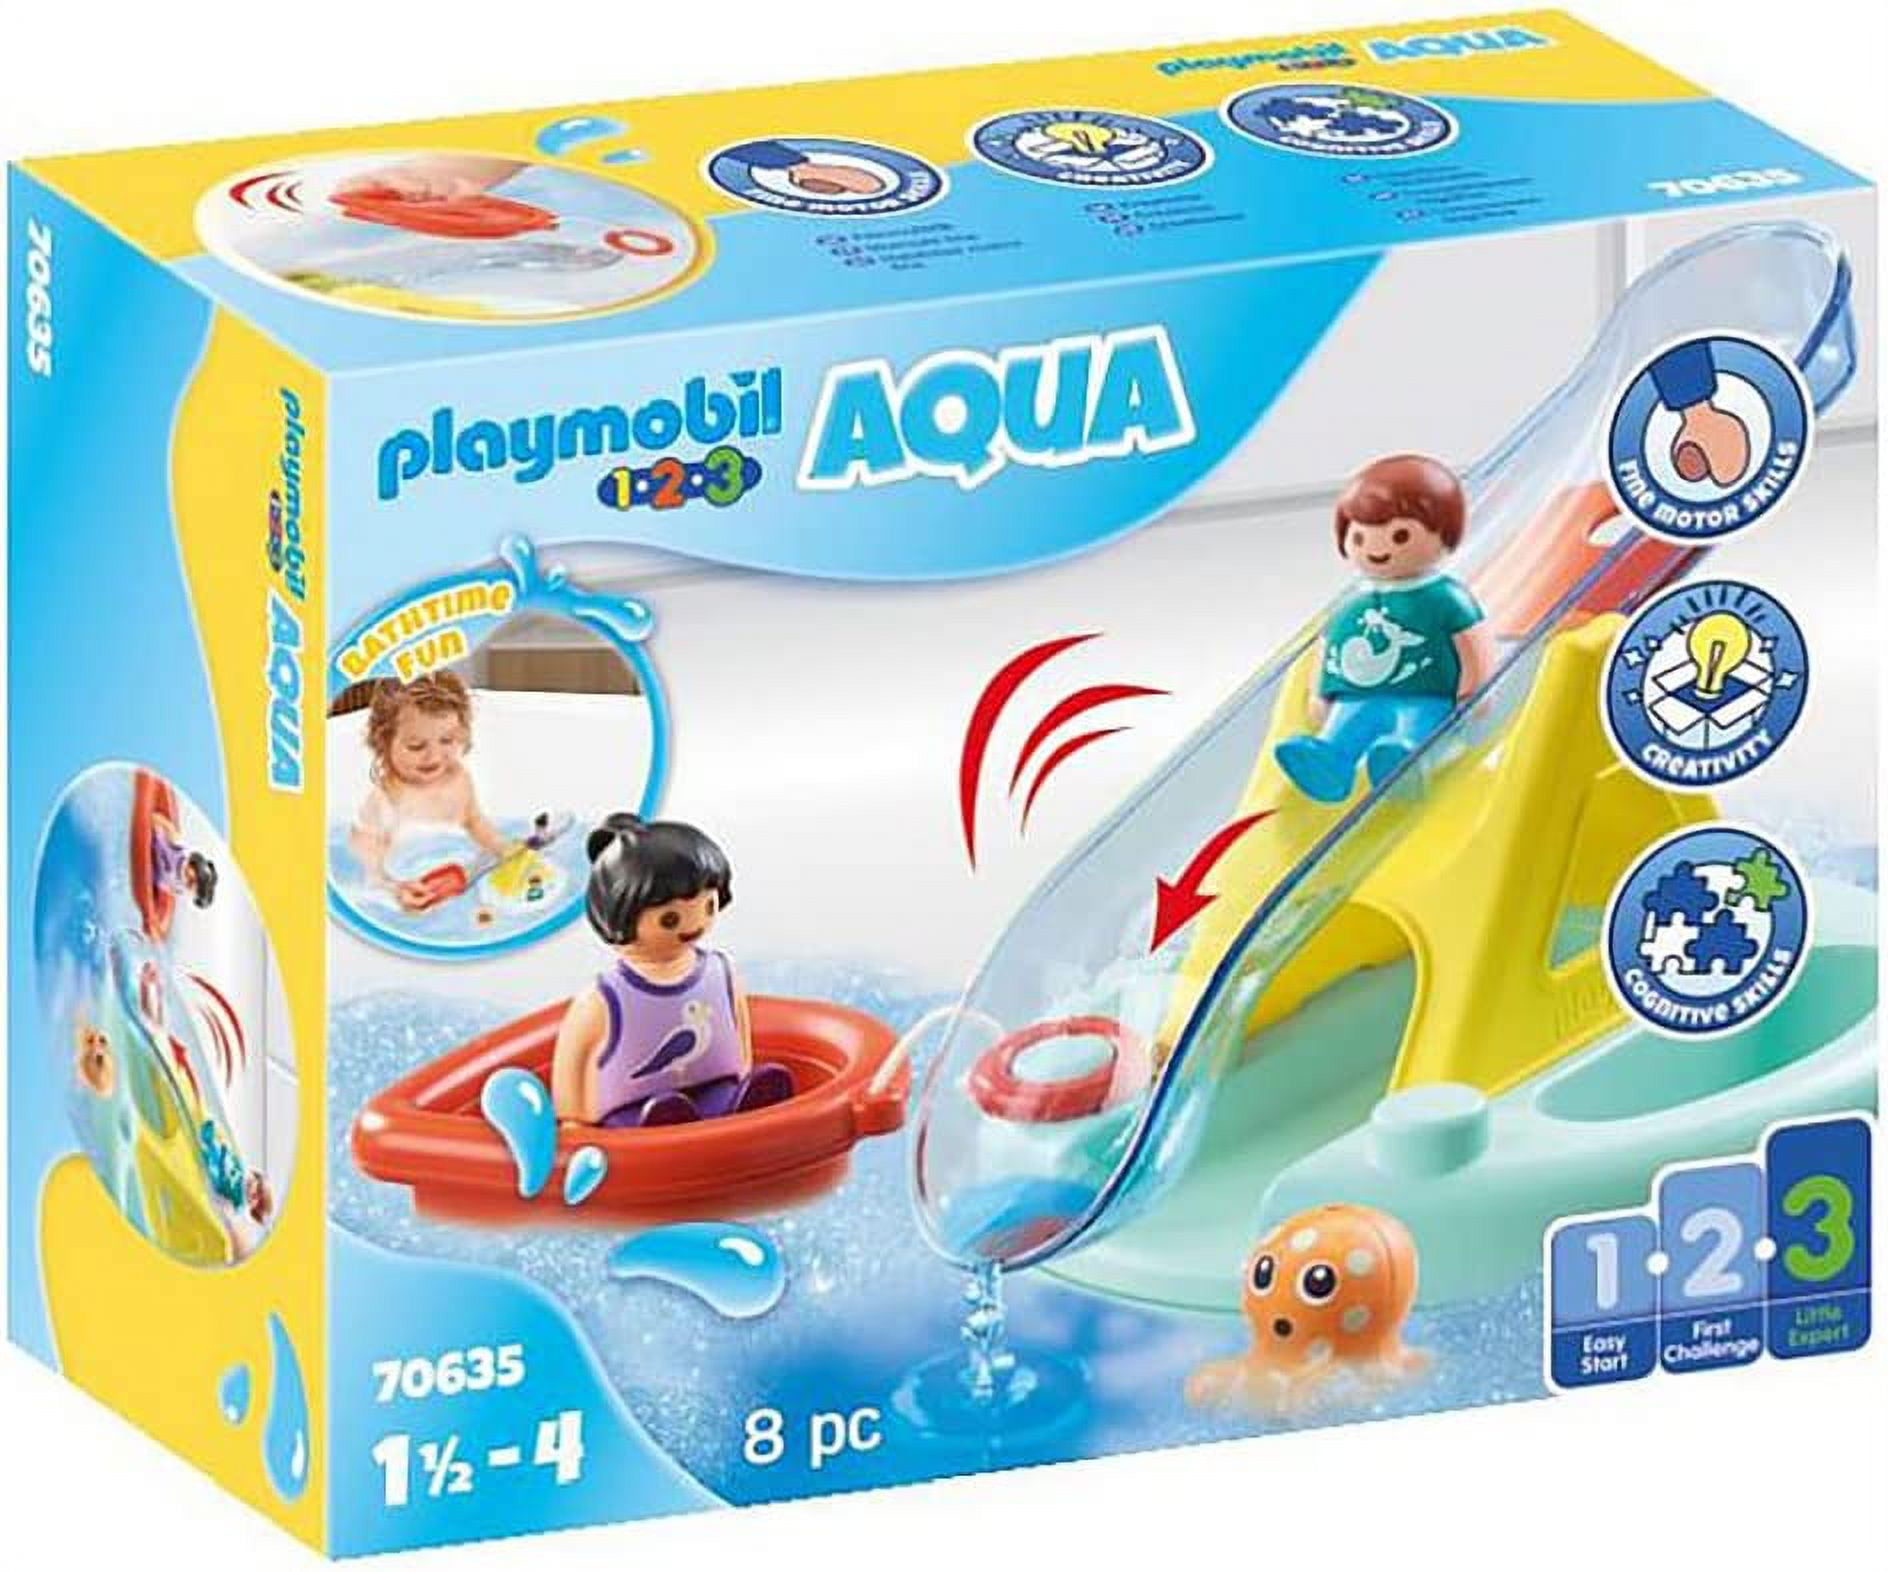 Playmobil 1.2.3 Aqua Water Slide 70270 (for kids 18 months to 4